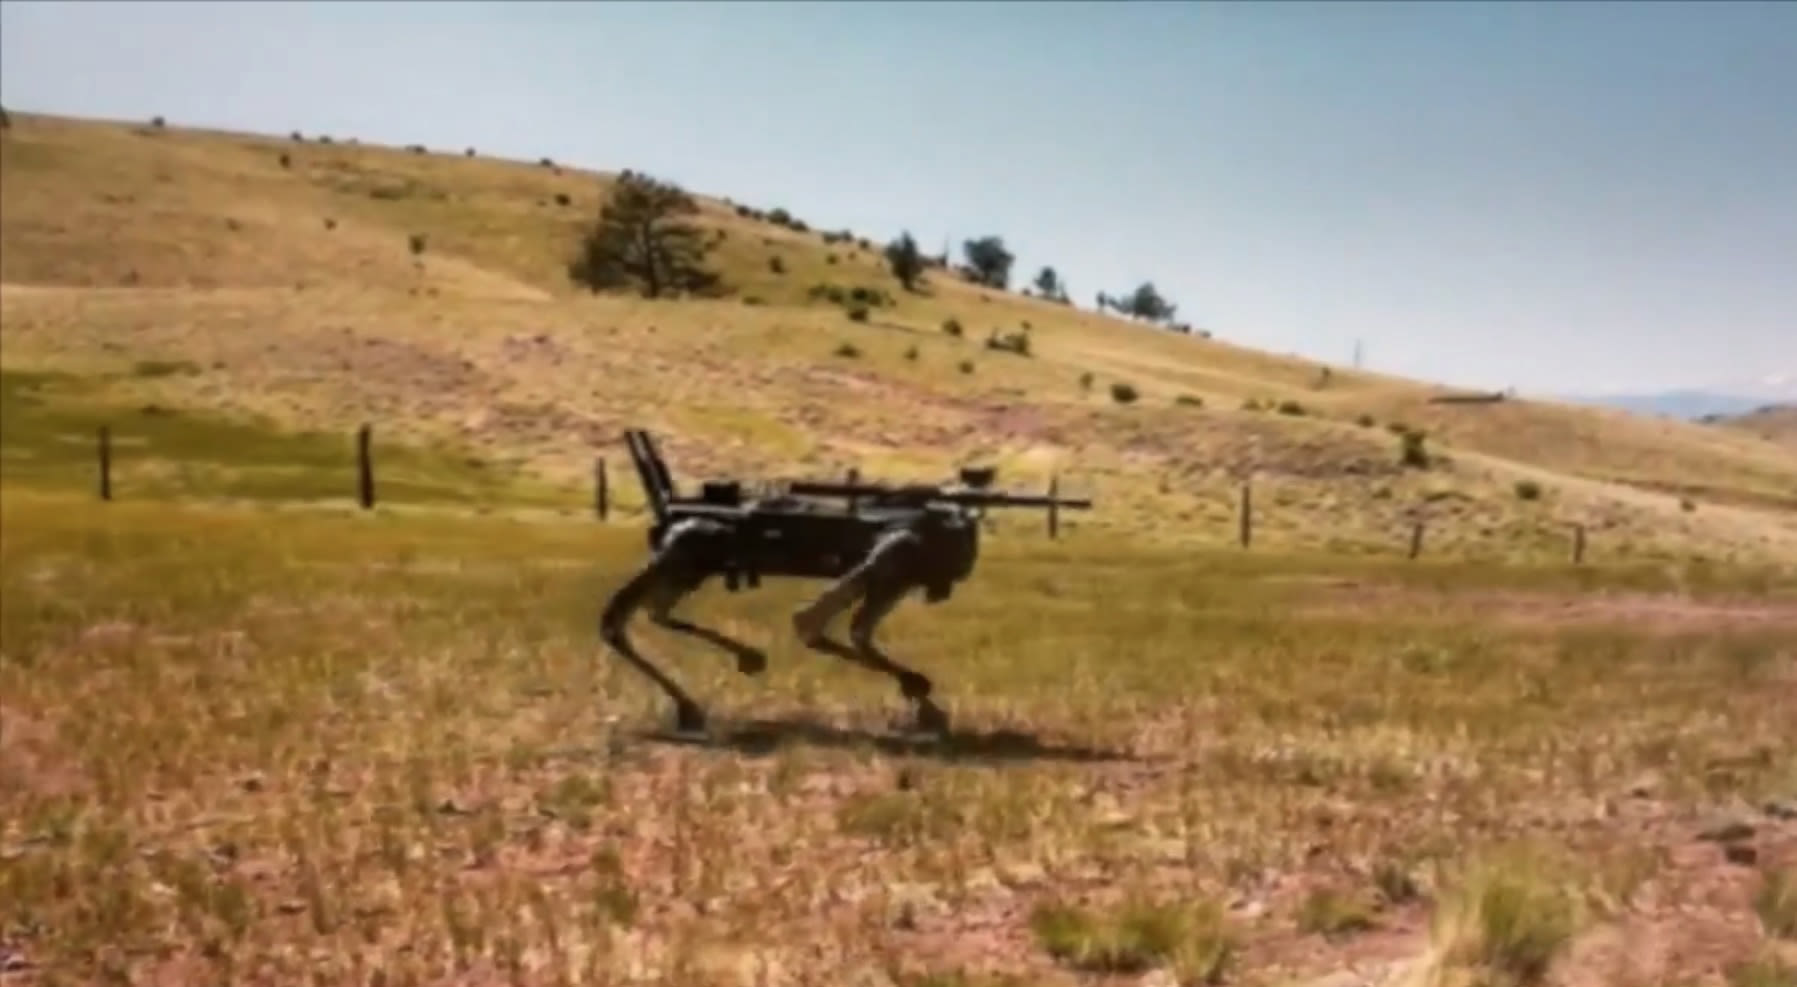 Watch 'terminator' robot dog with AI-targeting rifles tested being by US Marines